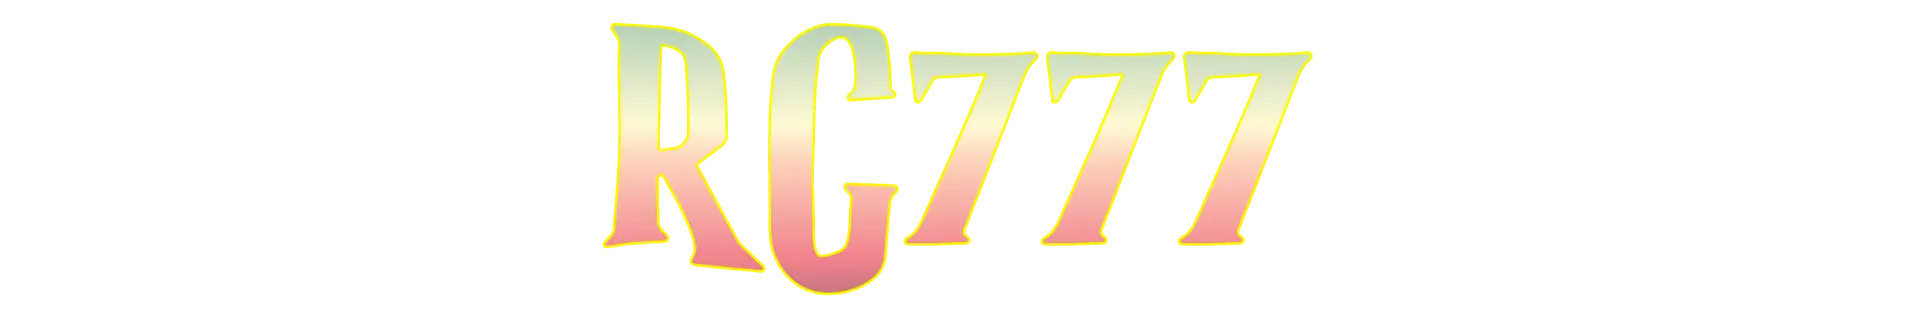 Rc777